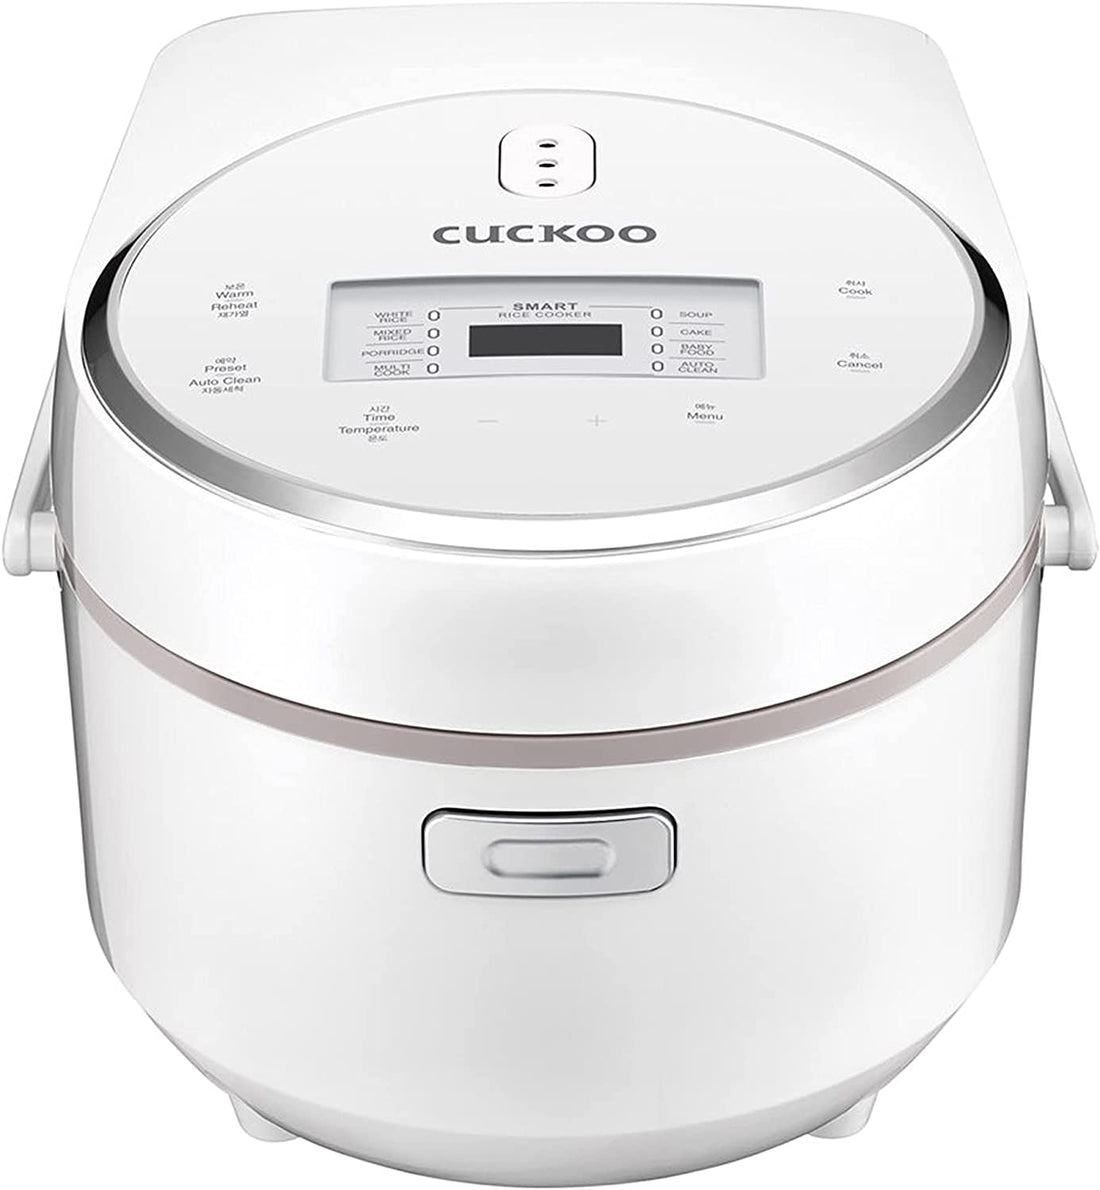 Cuckoo Micom Rice Cooker with 9 Menu Options, 8-Cup (Uncooked)